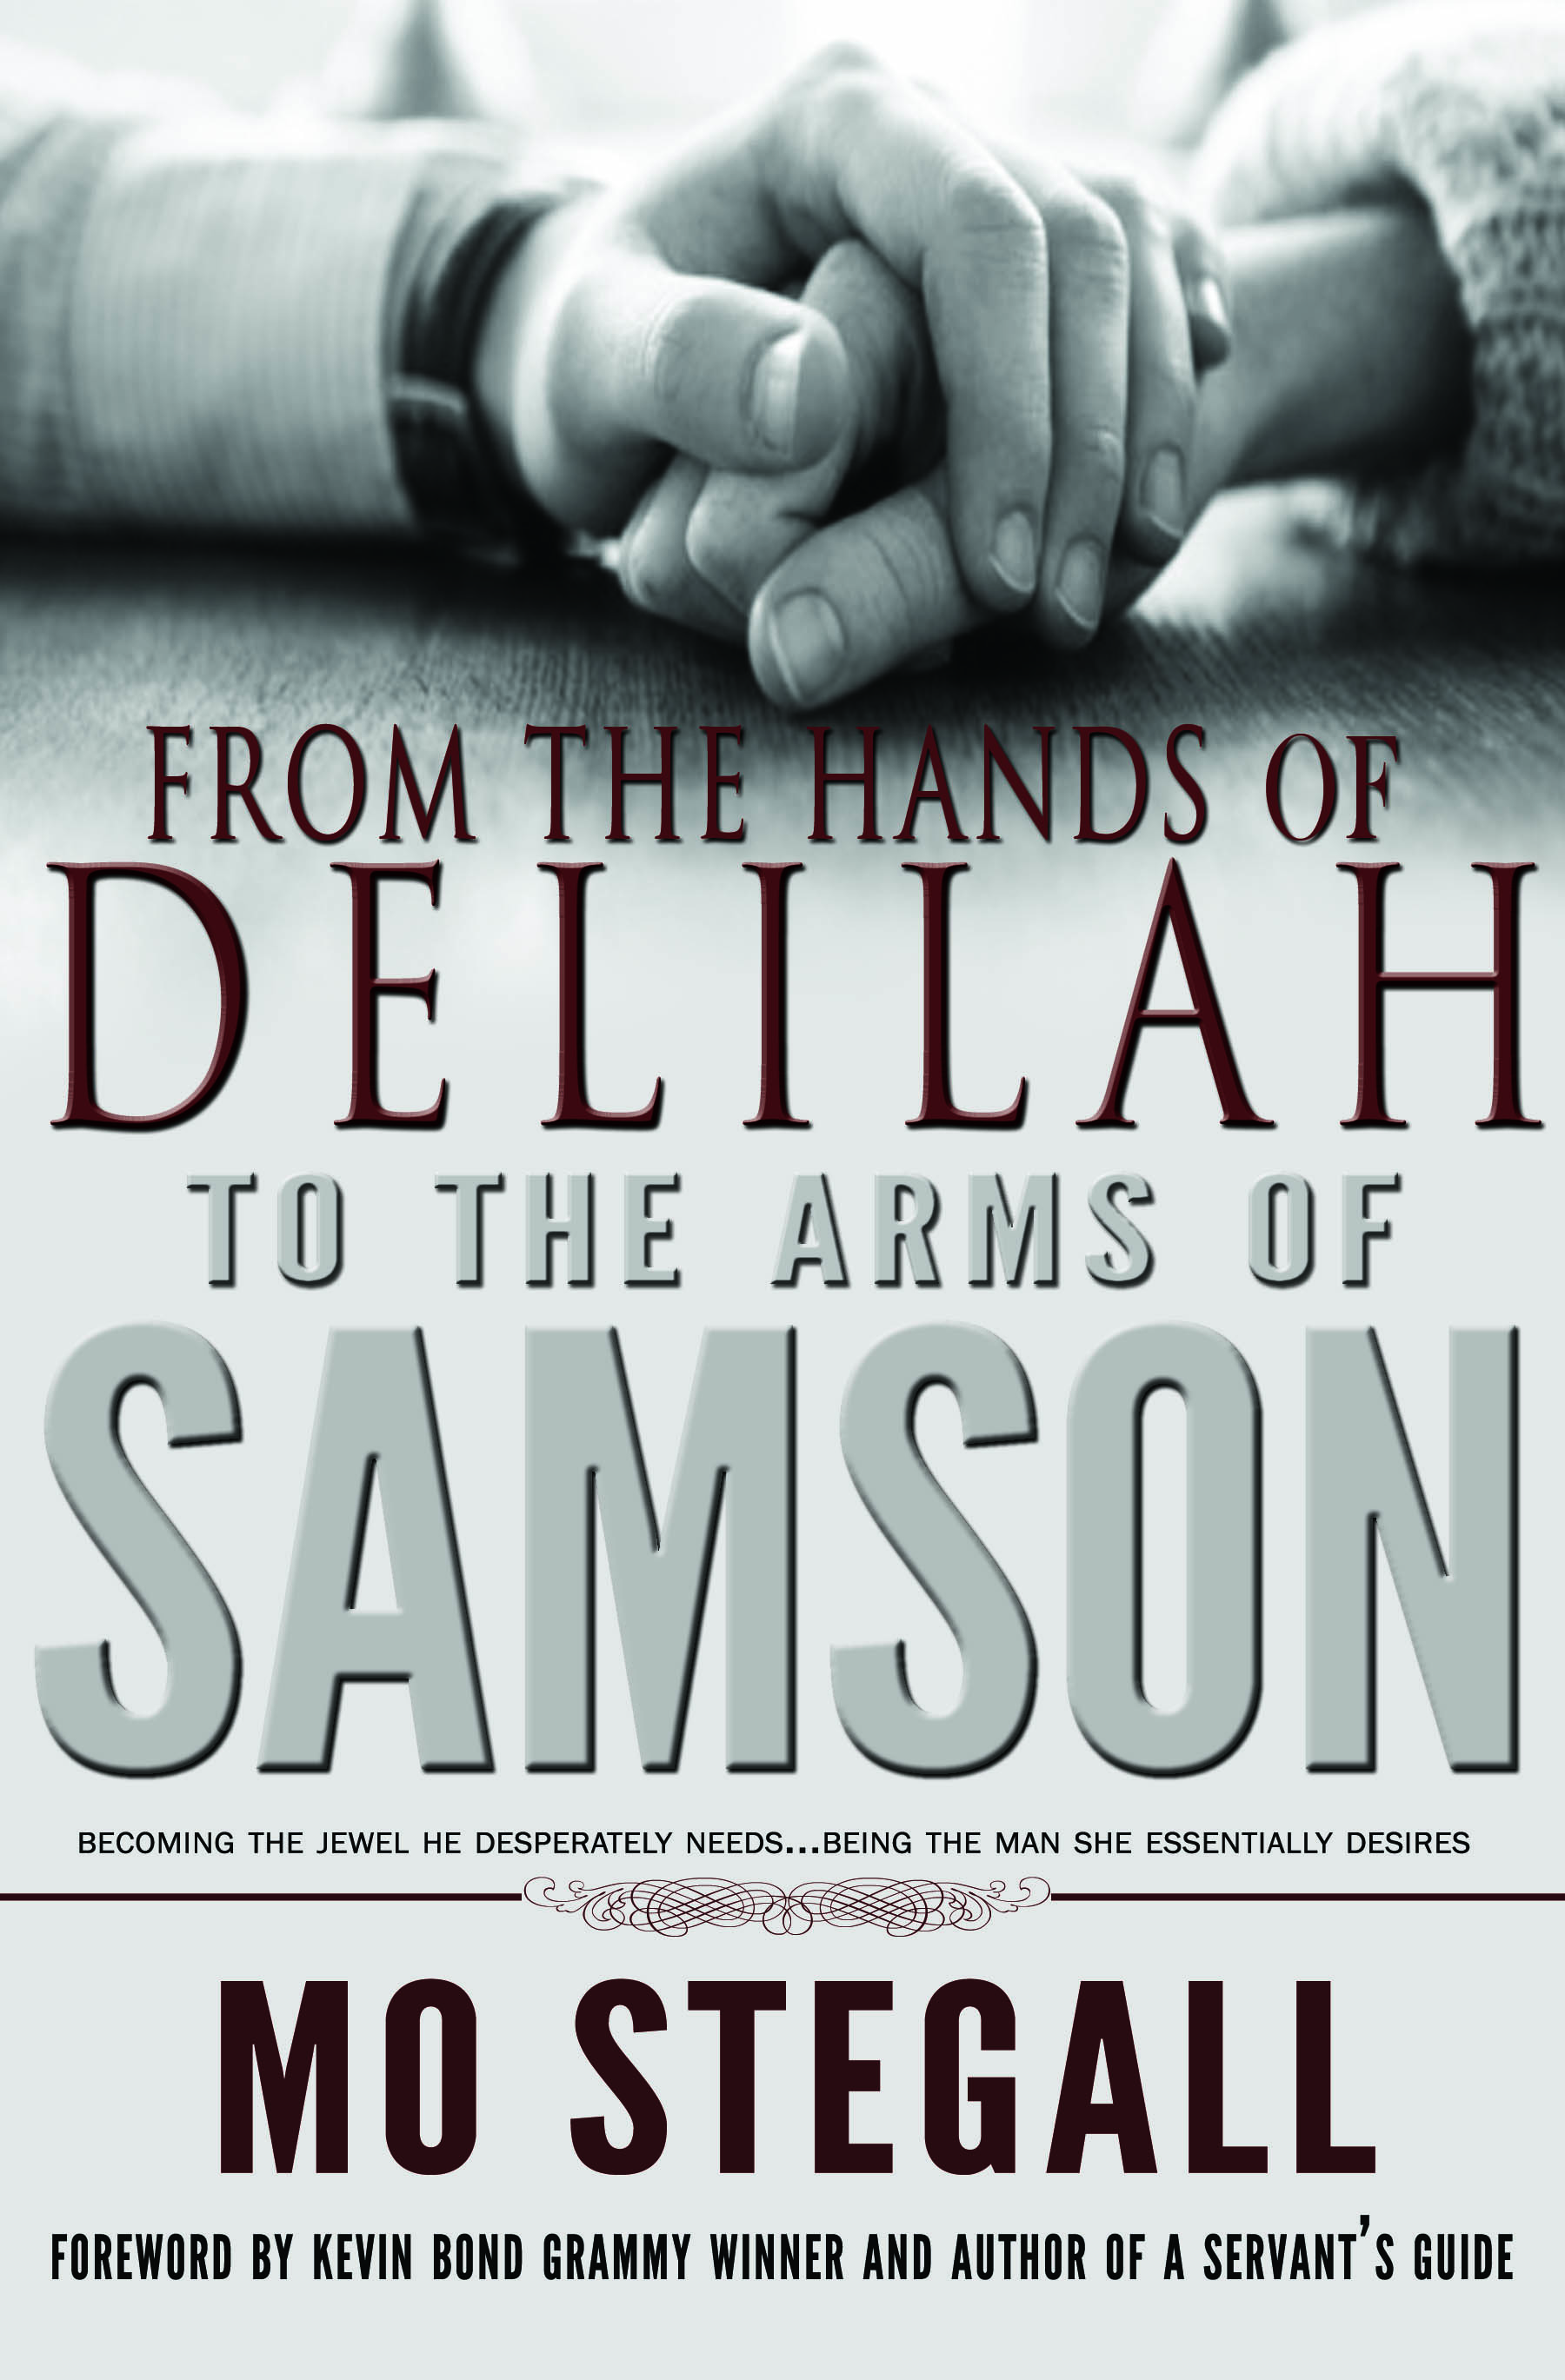 From the Hands of Delilah to the Arms of Samson